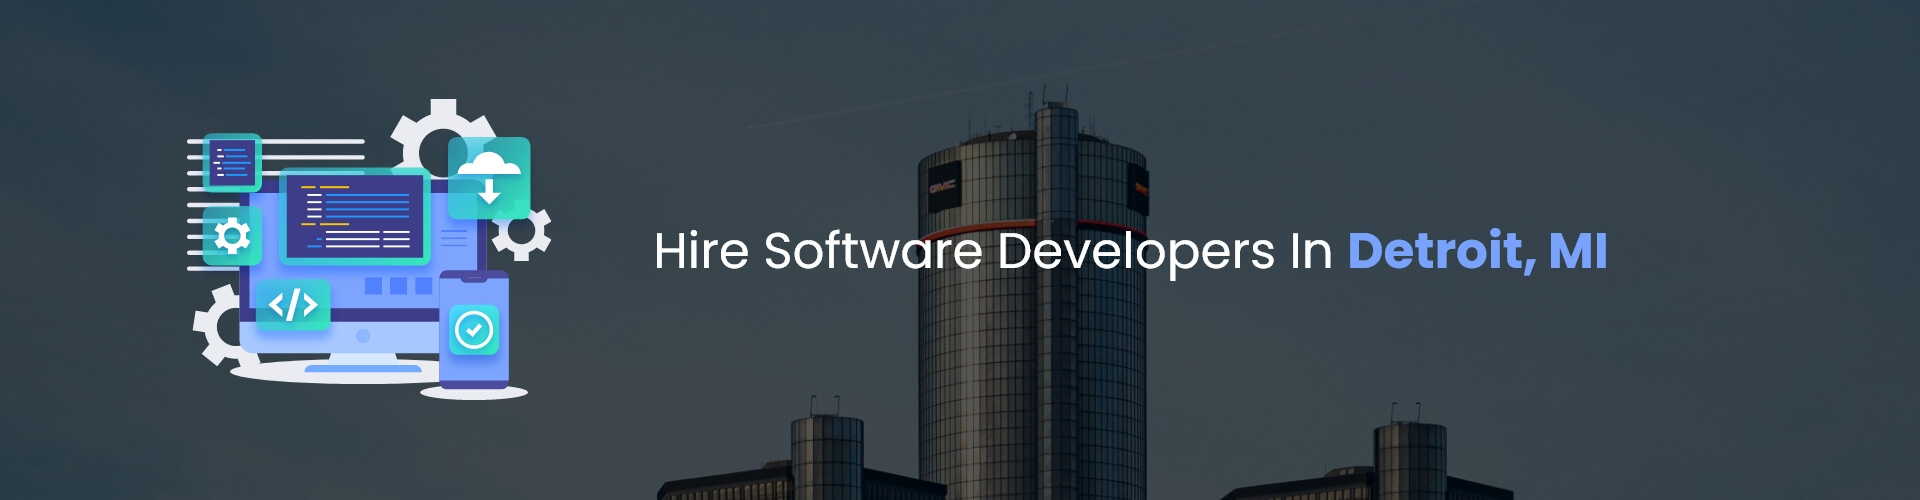 hire software developers in detroit